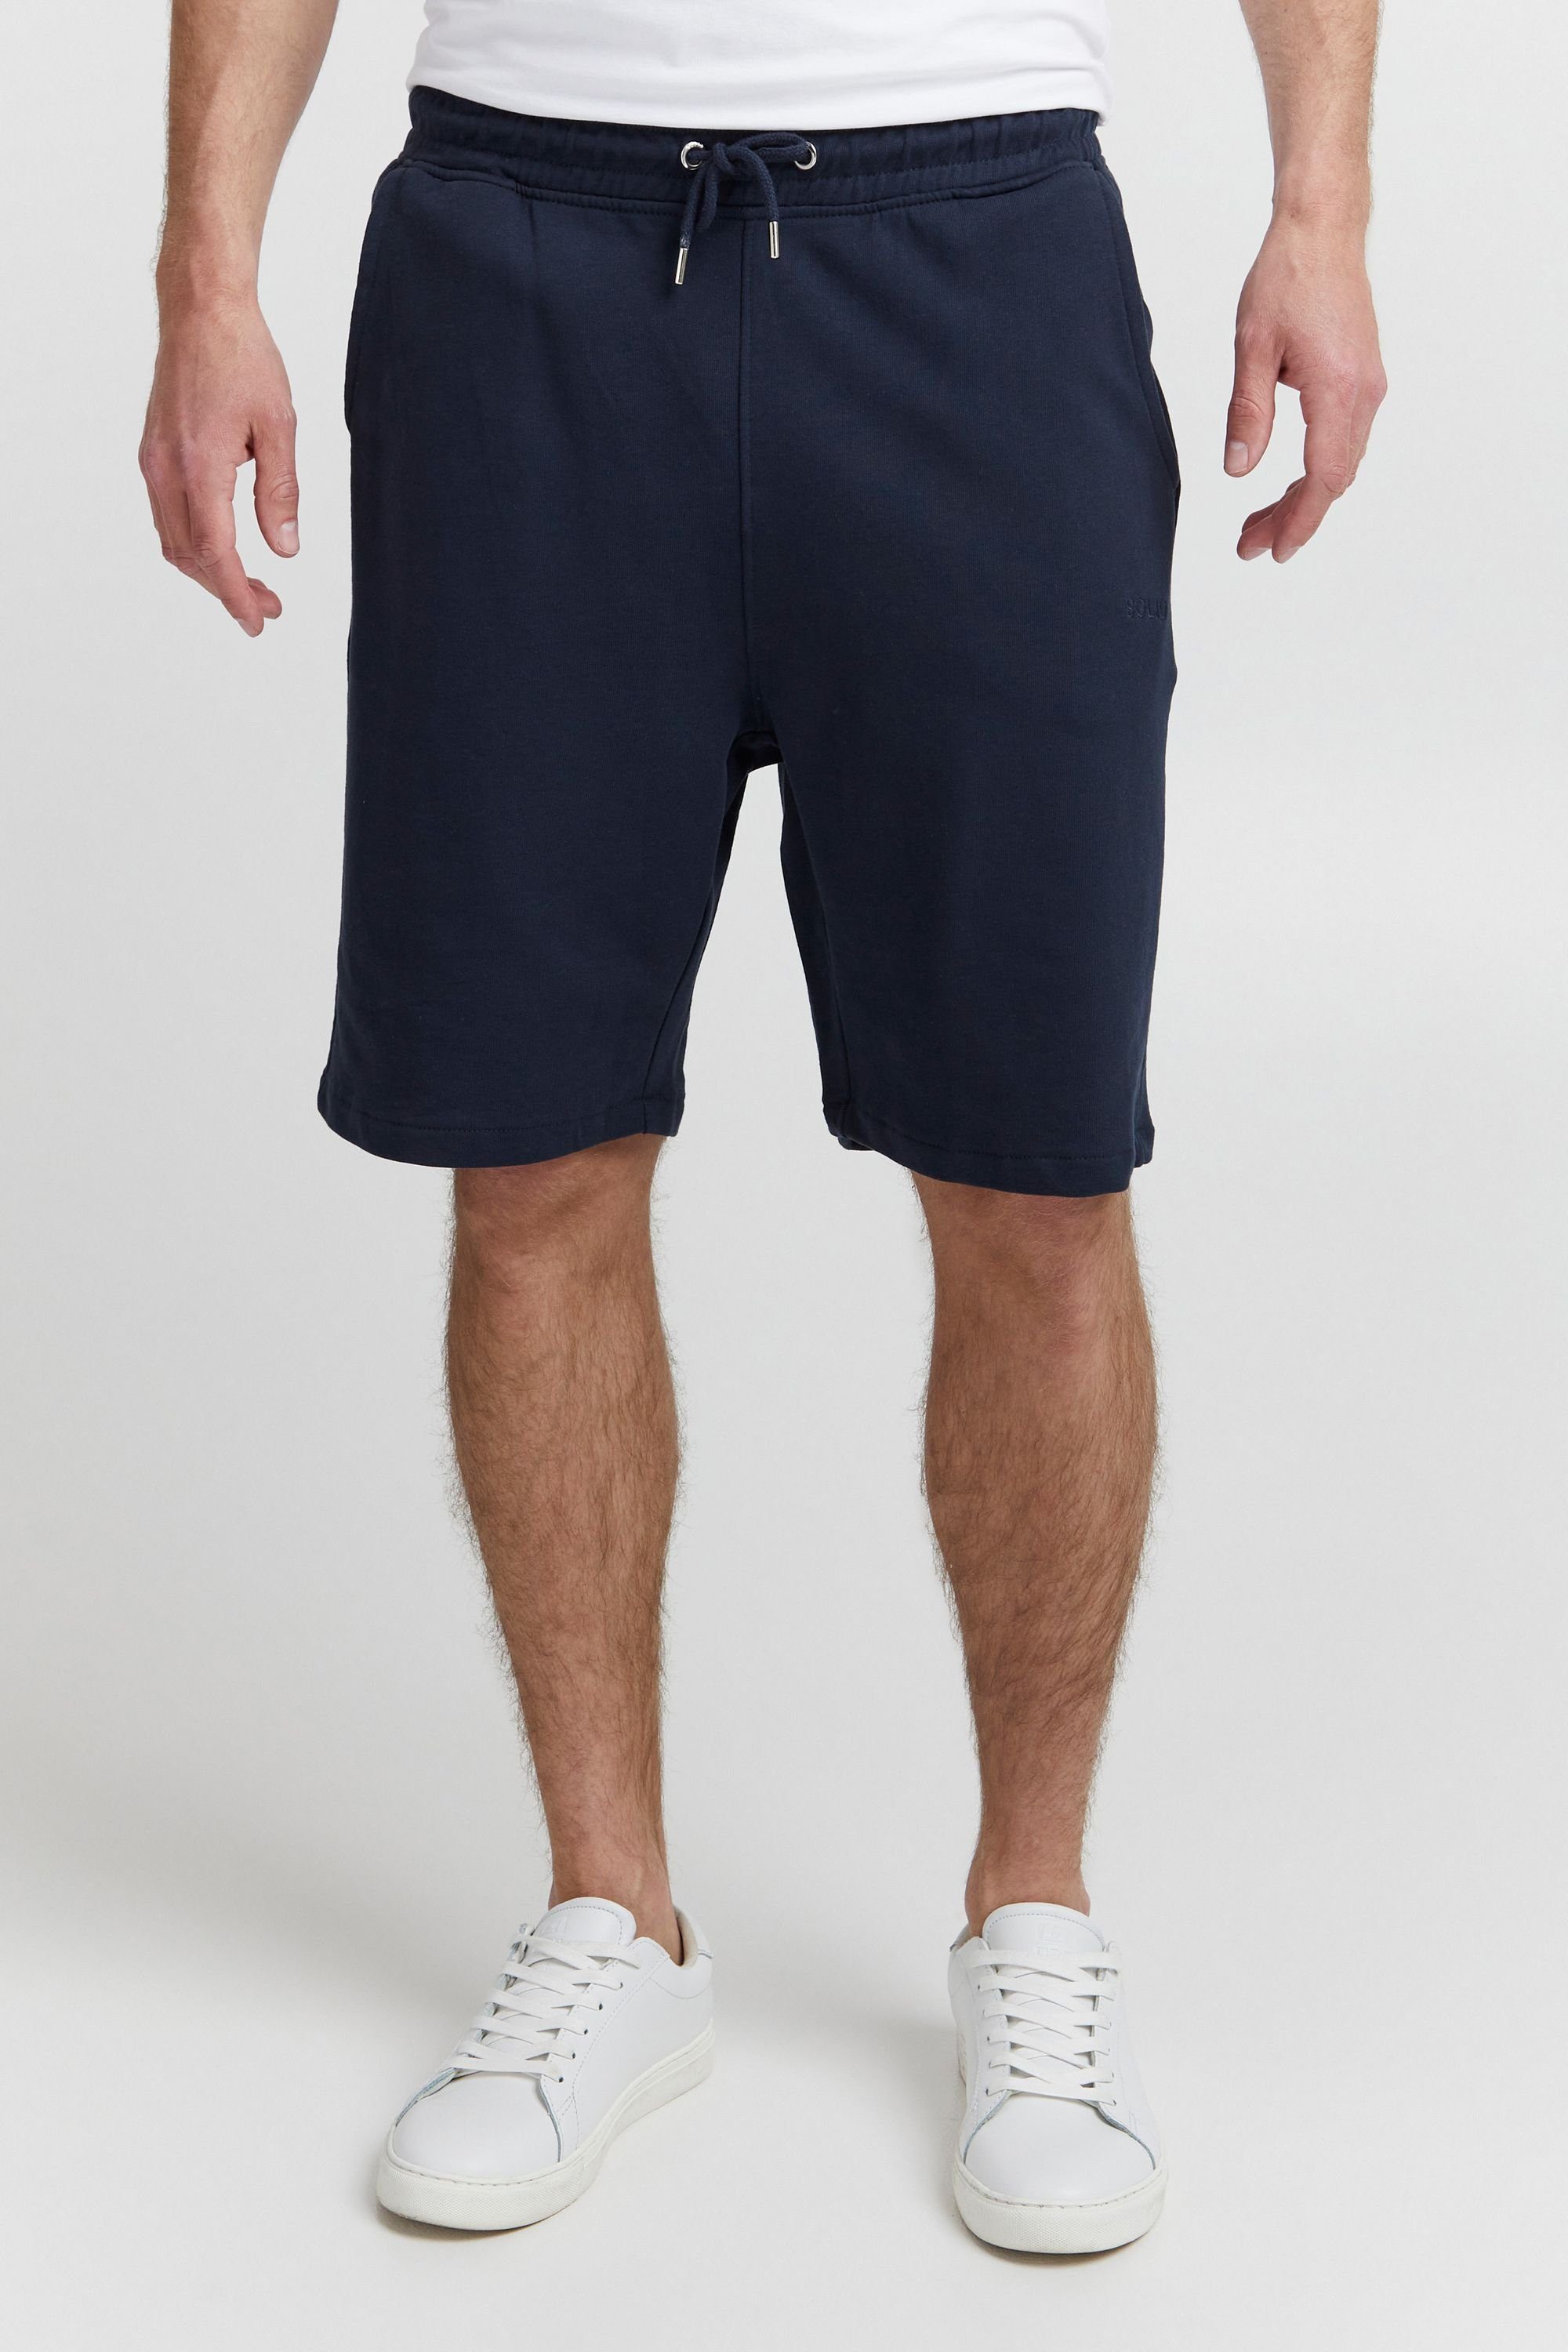 !Solid Relaxshorts SDBrenden SHO - 21106991 INSIGNIA BLUE (194010)